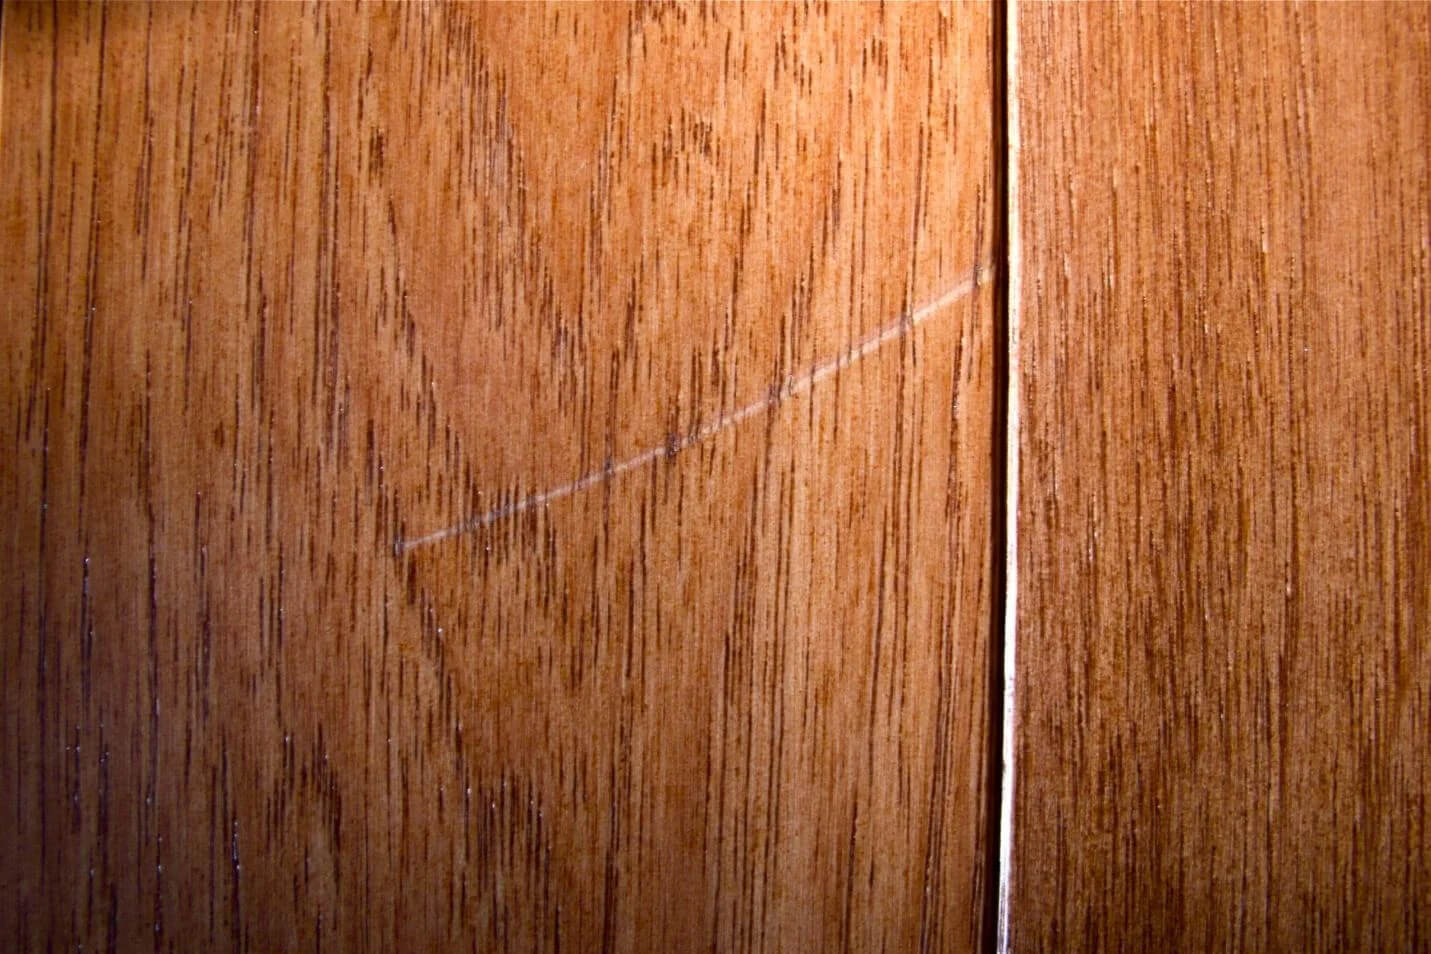 <a href='https://greatertennessee.com/flooring/flooring-101/hardwood-101/how-to-fix-scratches-on-hardwood-floors/' title='How to Fix Scratches on Hardwood Floors'>How to Fix Scratches on Hardwood Floors</a>